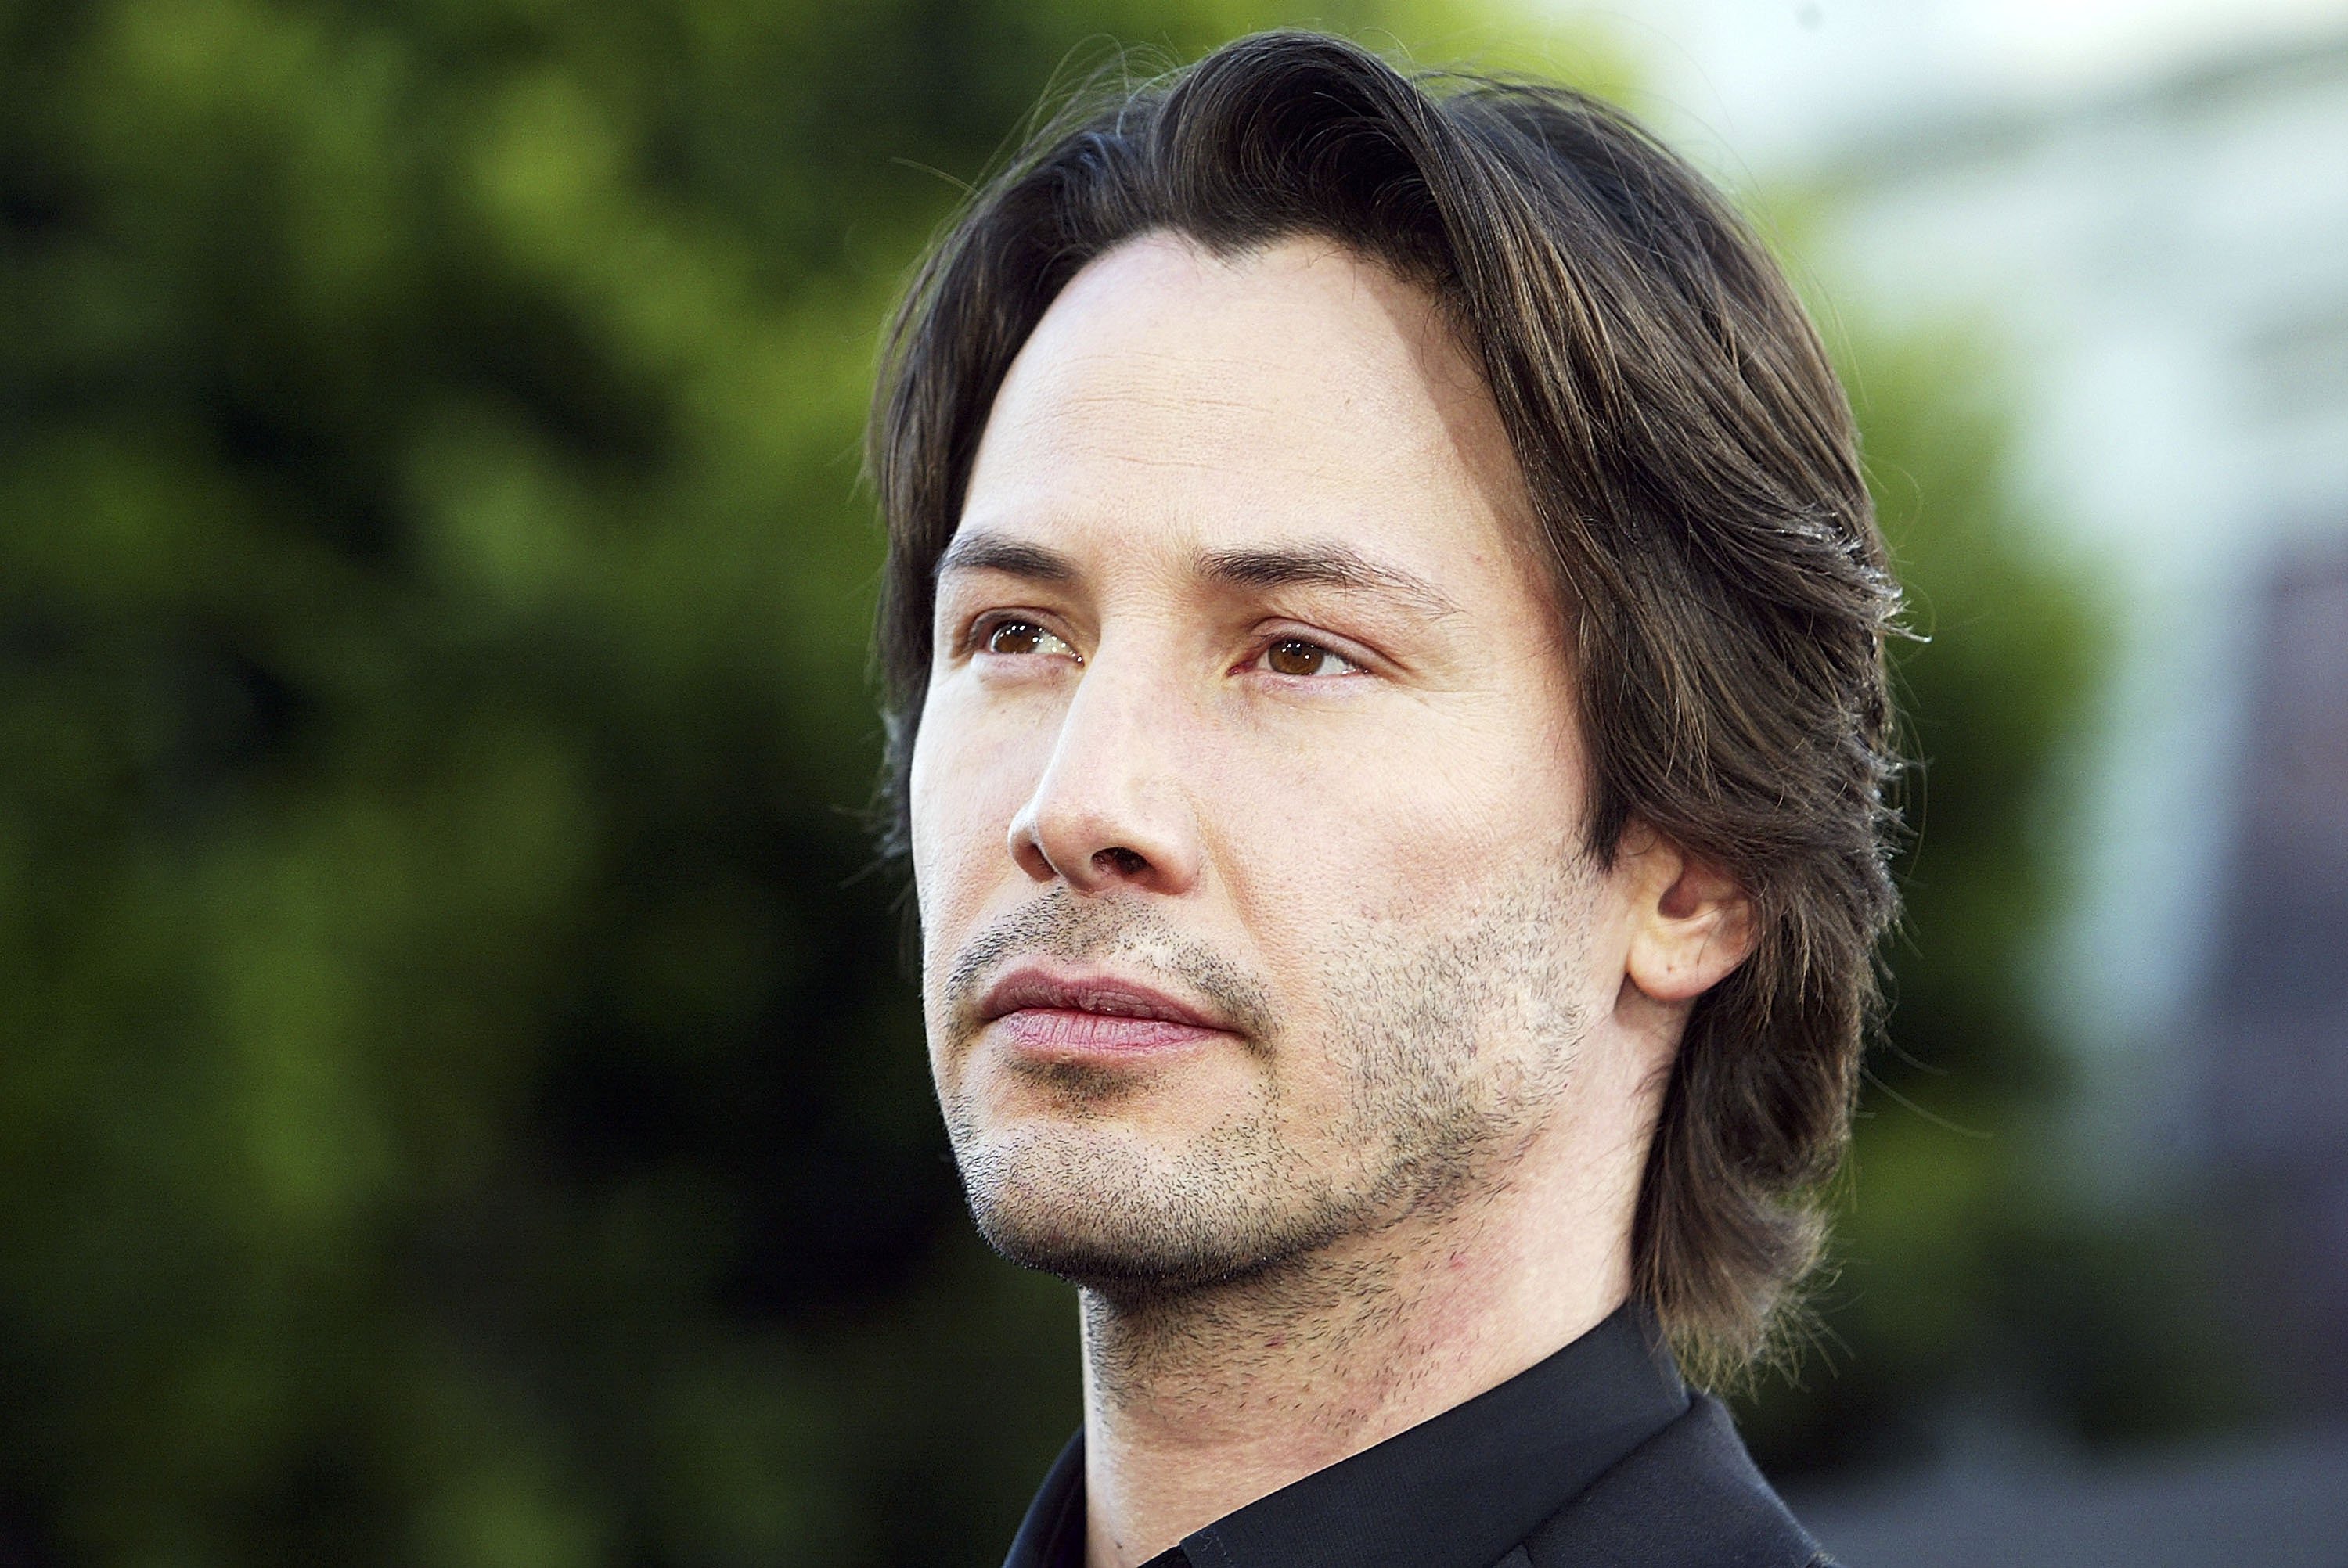 Keanu Reeves at the premiere of "The Matrix Reloaded" on May 7, 2003, in Los Angeles. | Source: Getty Images